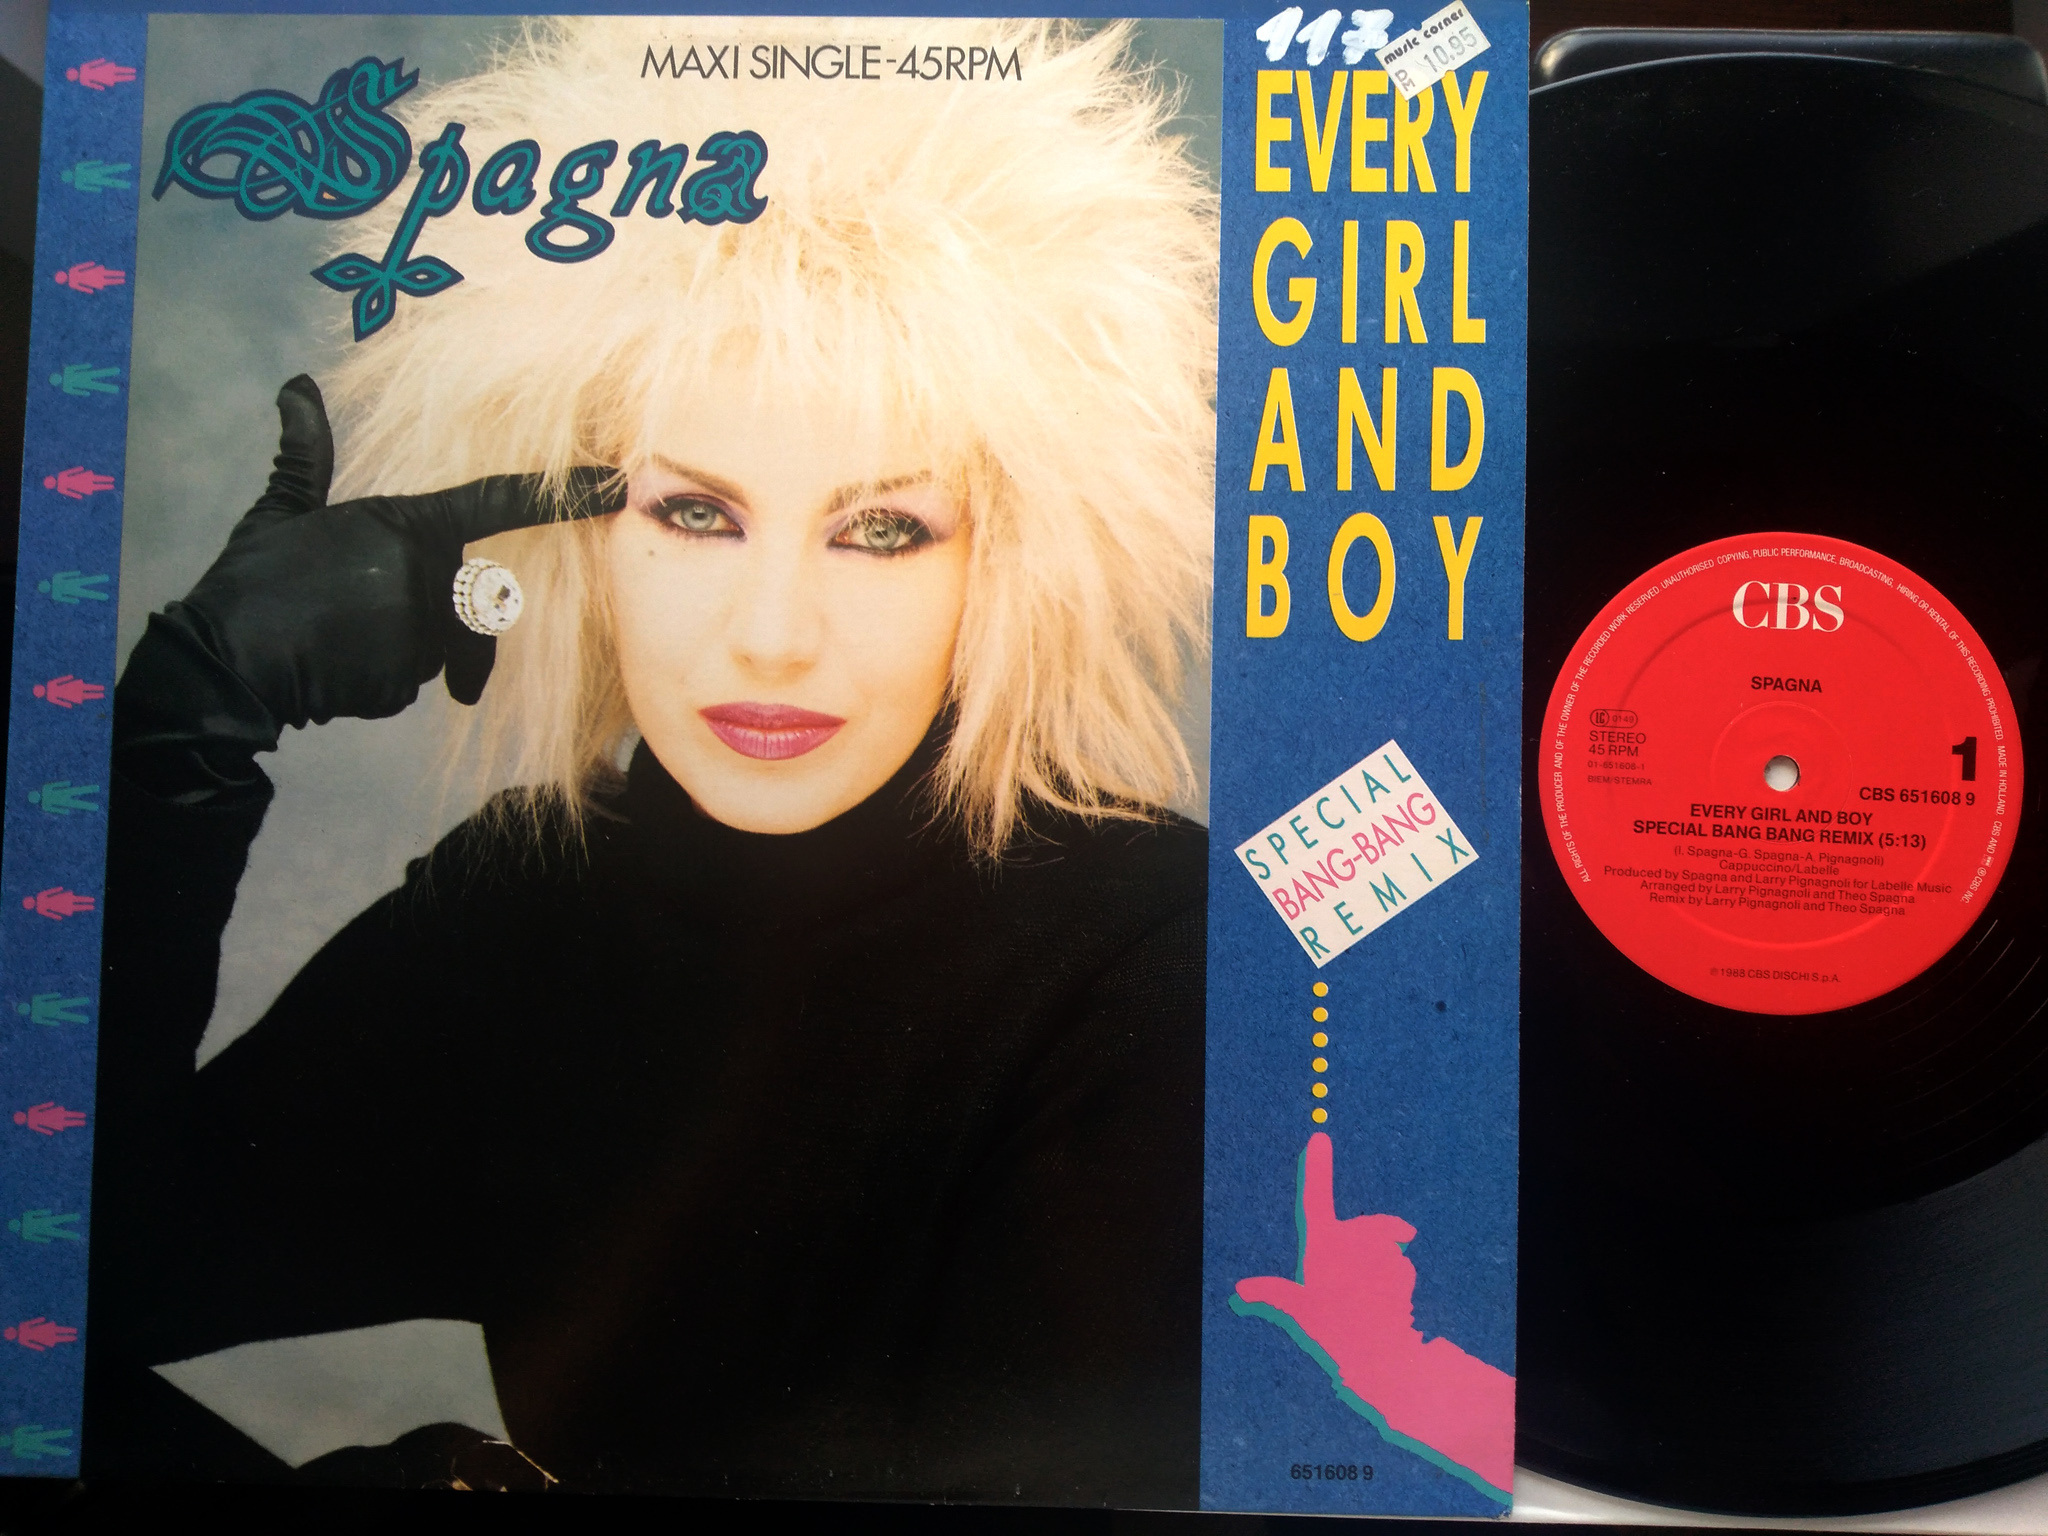 Spagna - Every Girl And Boy (Remix)